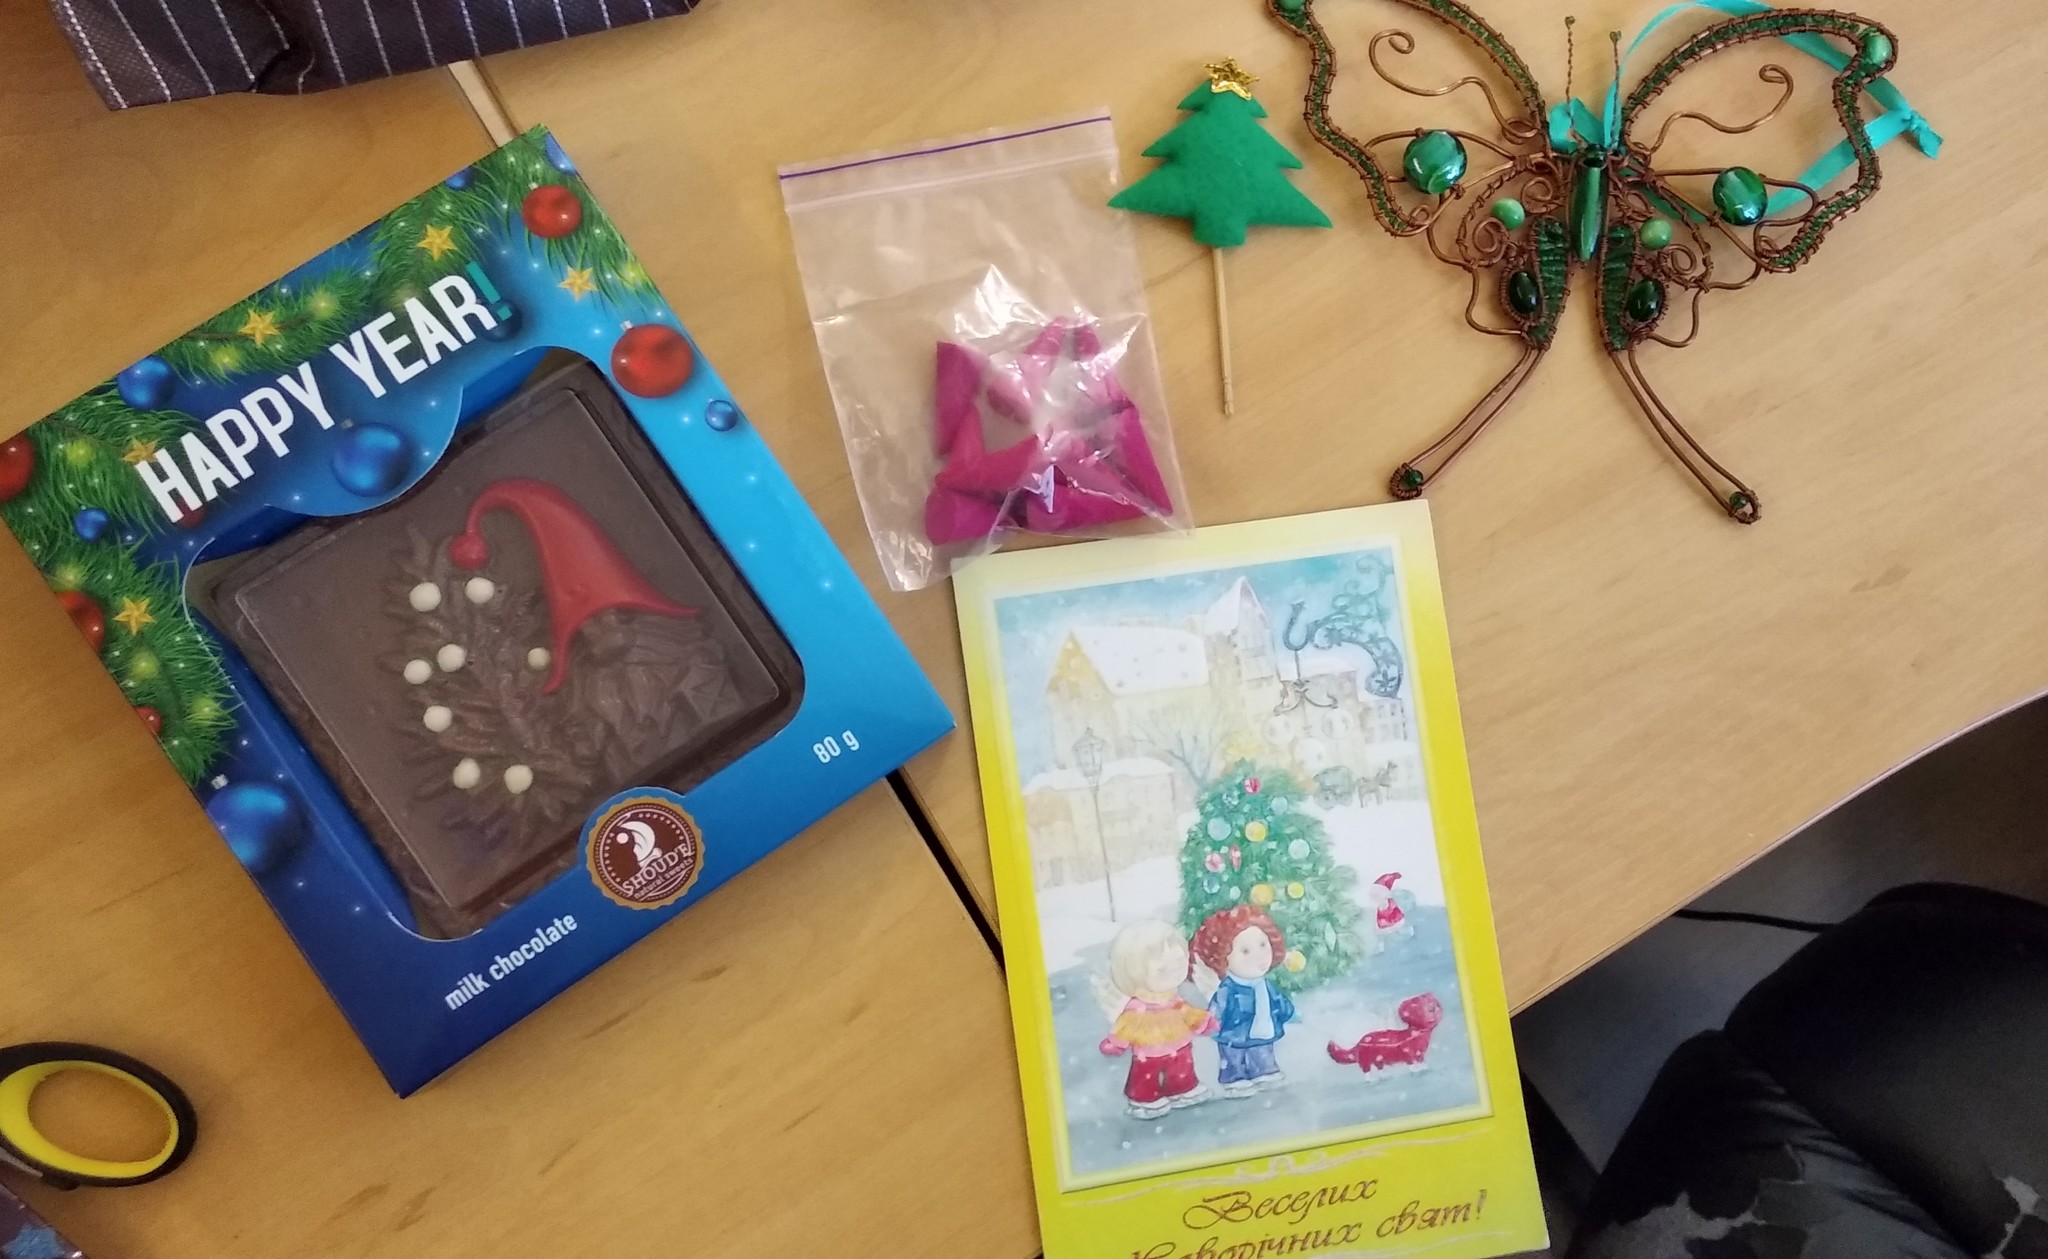 New Year's gift from the altruistic Snow Maiden from Zhitomir to Dnieper! - My, Gift exchange, Longpost, Snow Maiden, Altruism, Thank you, New Year's miracle, Secret Santa, Gift exchange report